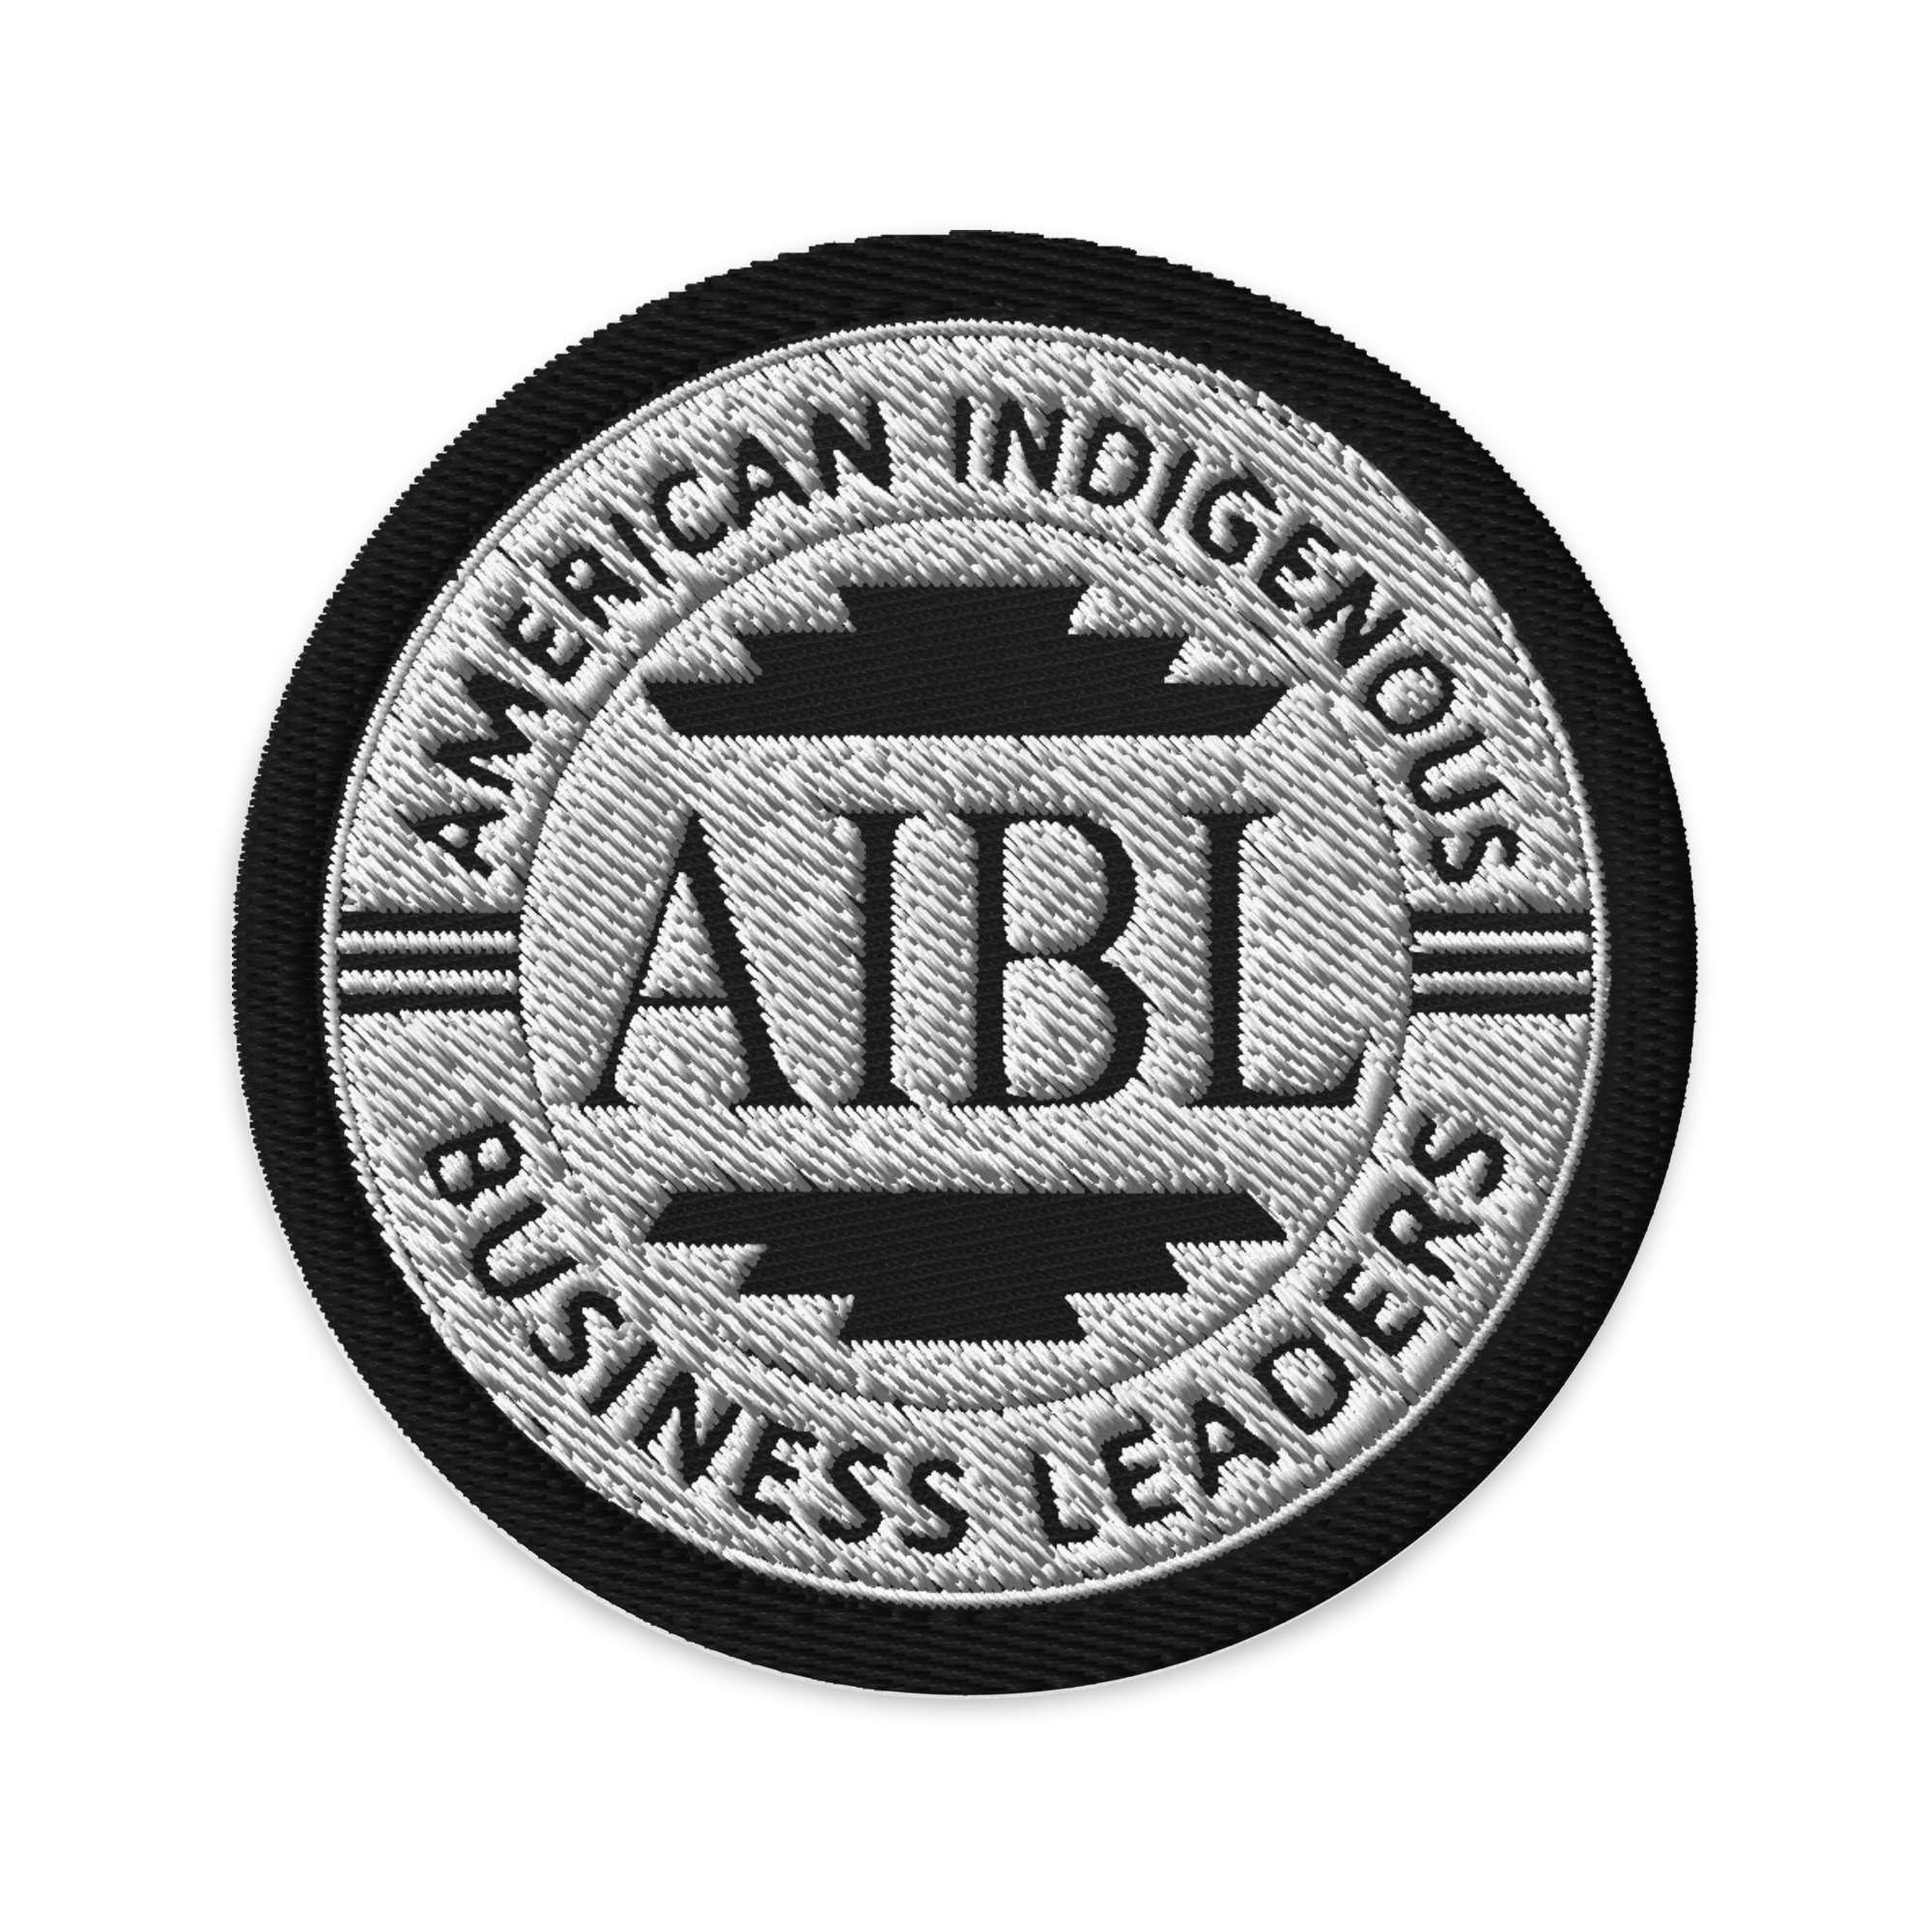 Embroidered Patche - American Indigenous Business Leaders